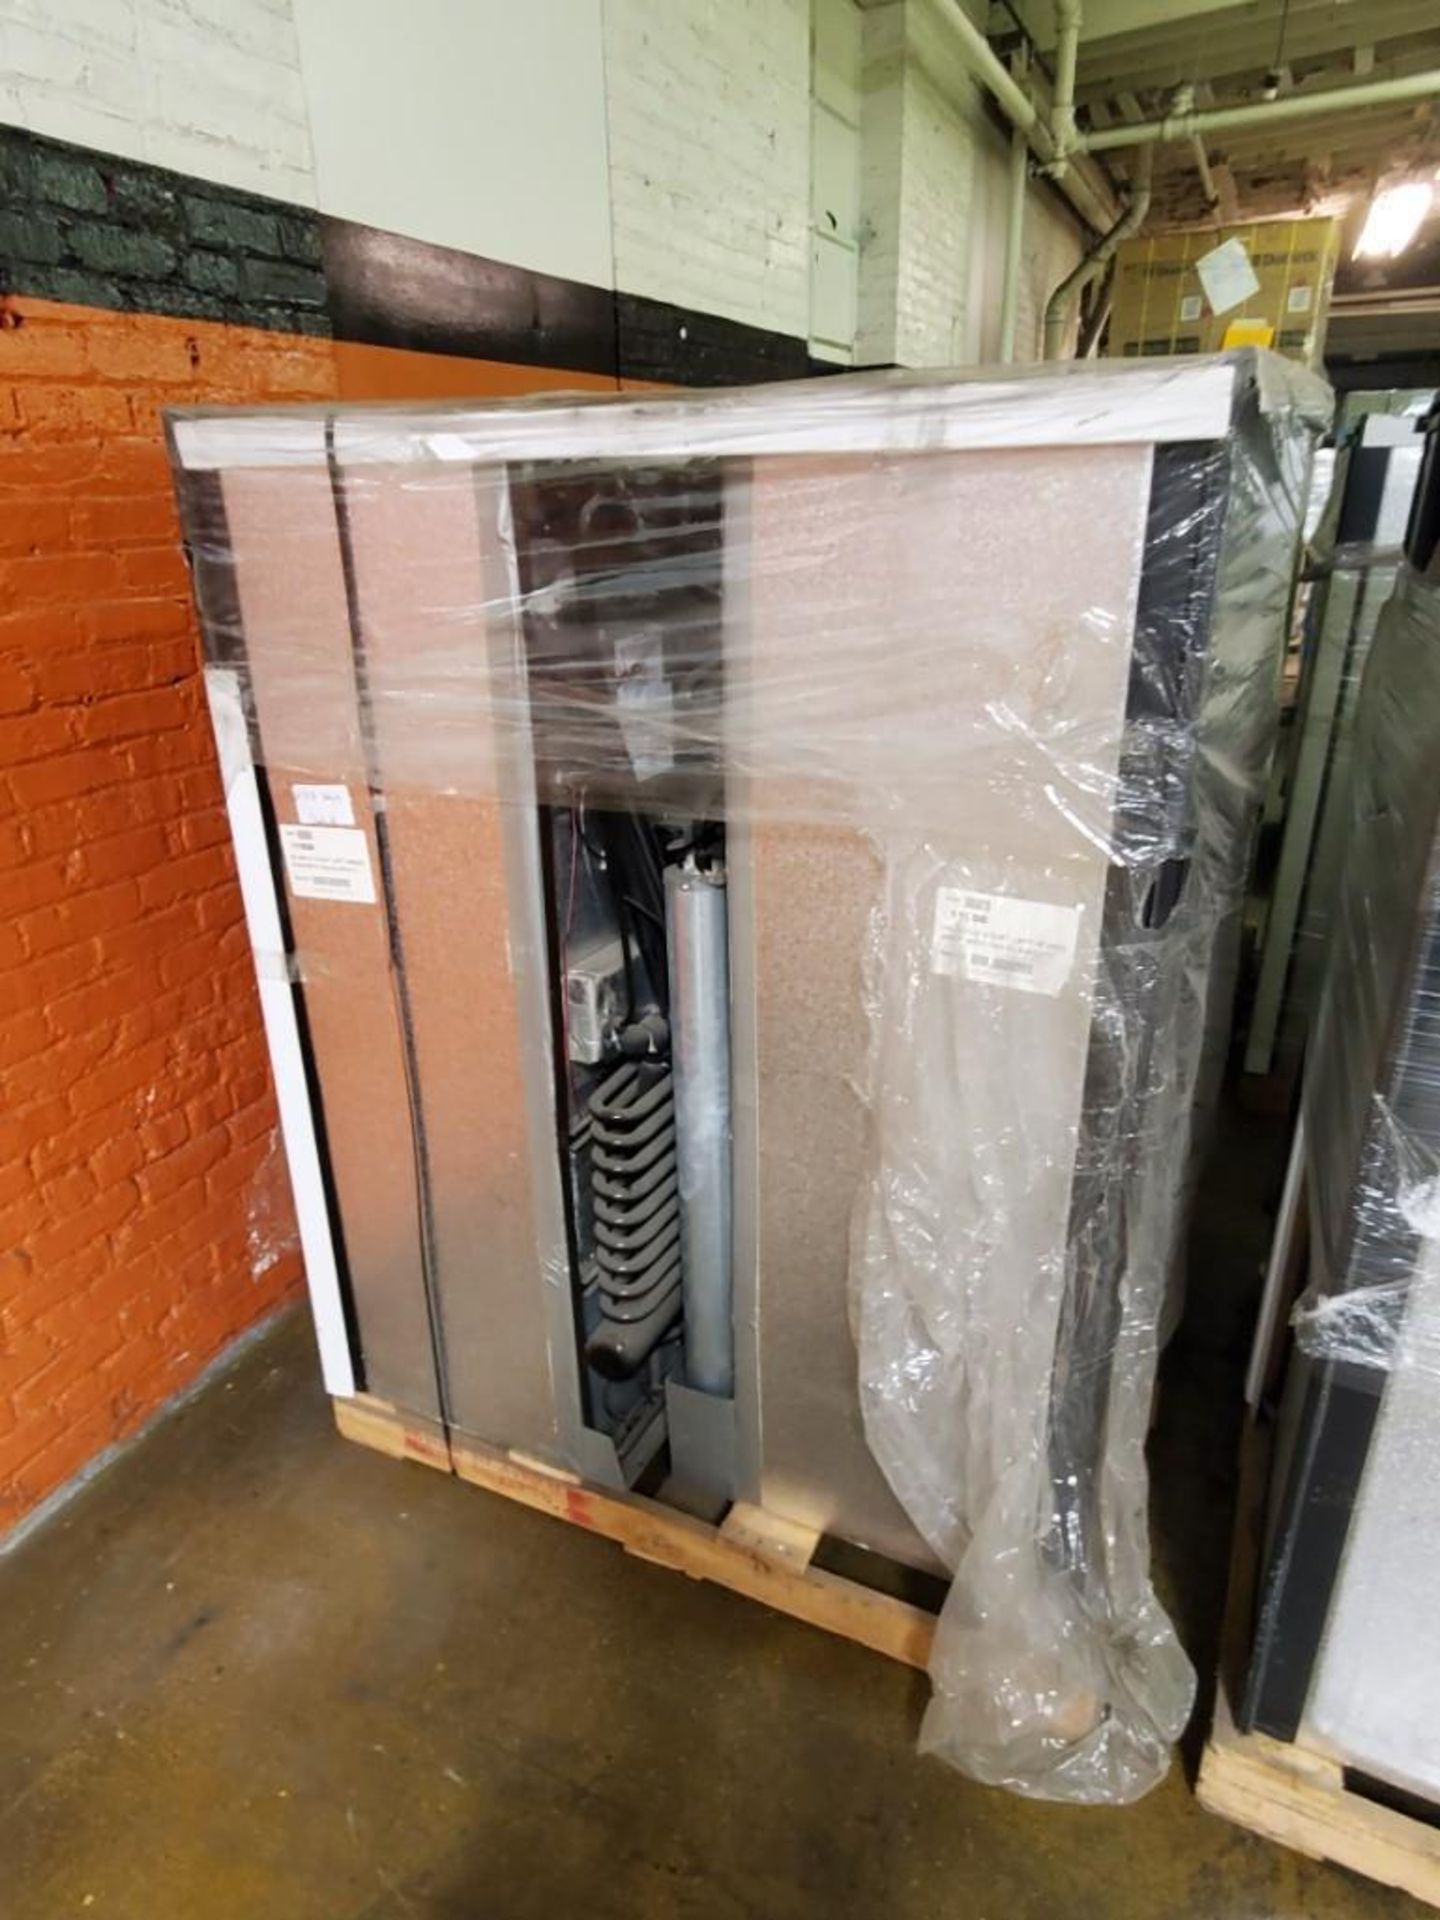 Qty 4 - Atwood refrigerator. Model HE-0801LF, 8 cu ft. Left hinged door with fan slide out. New. - Image 5 of 5